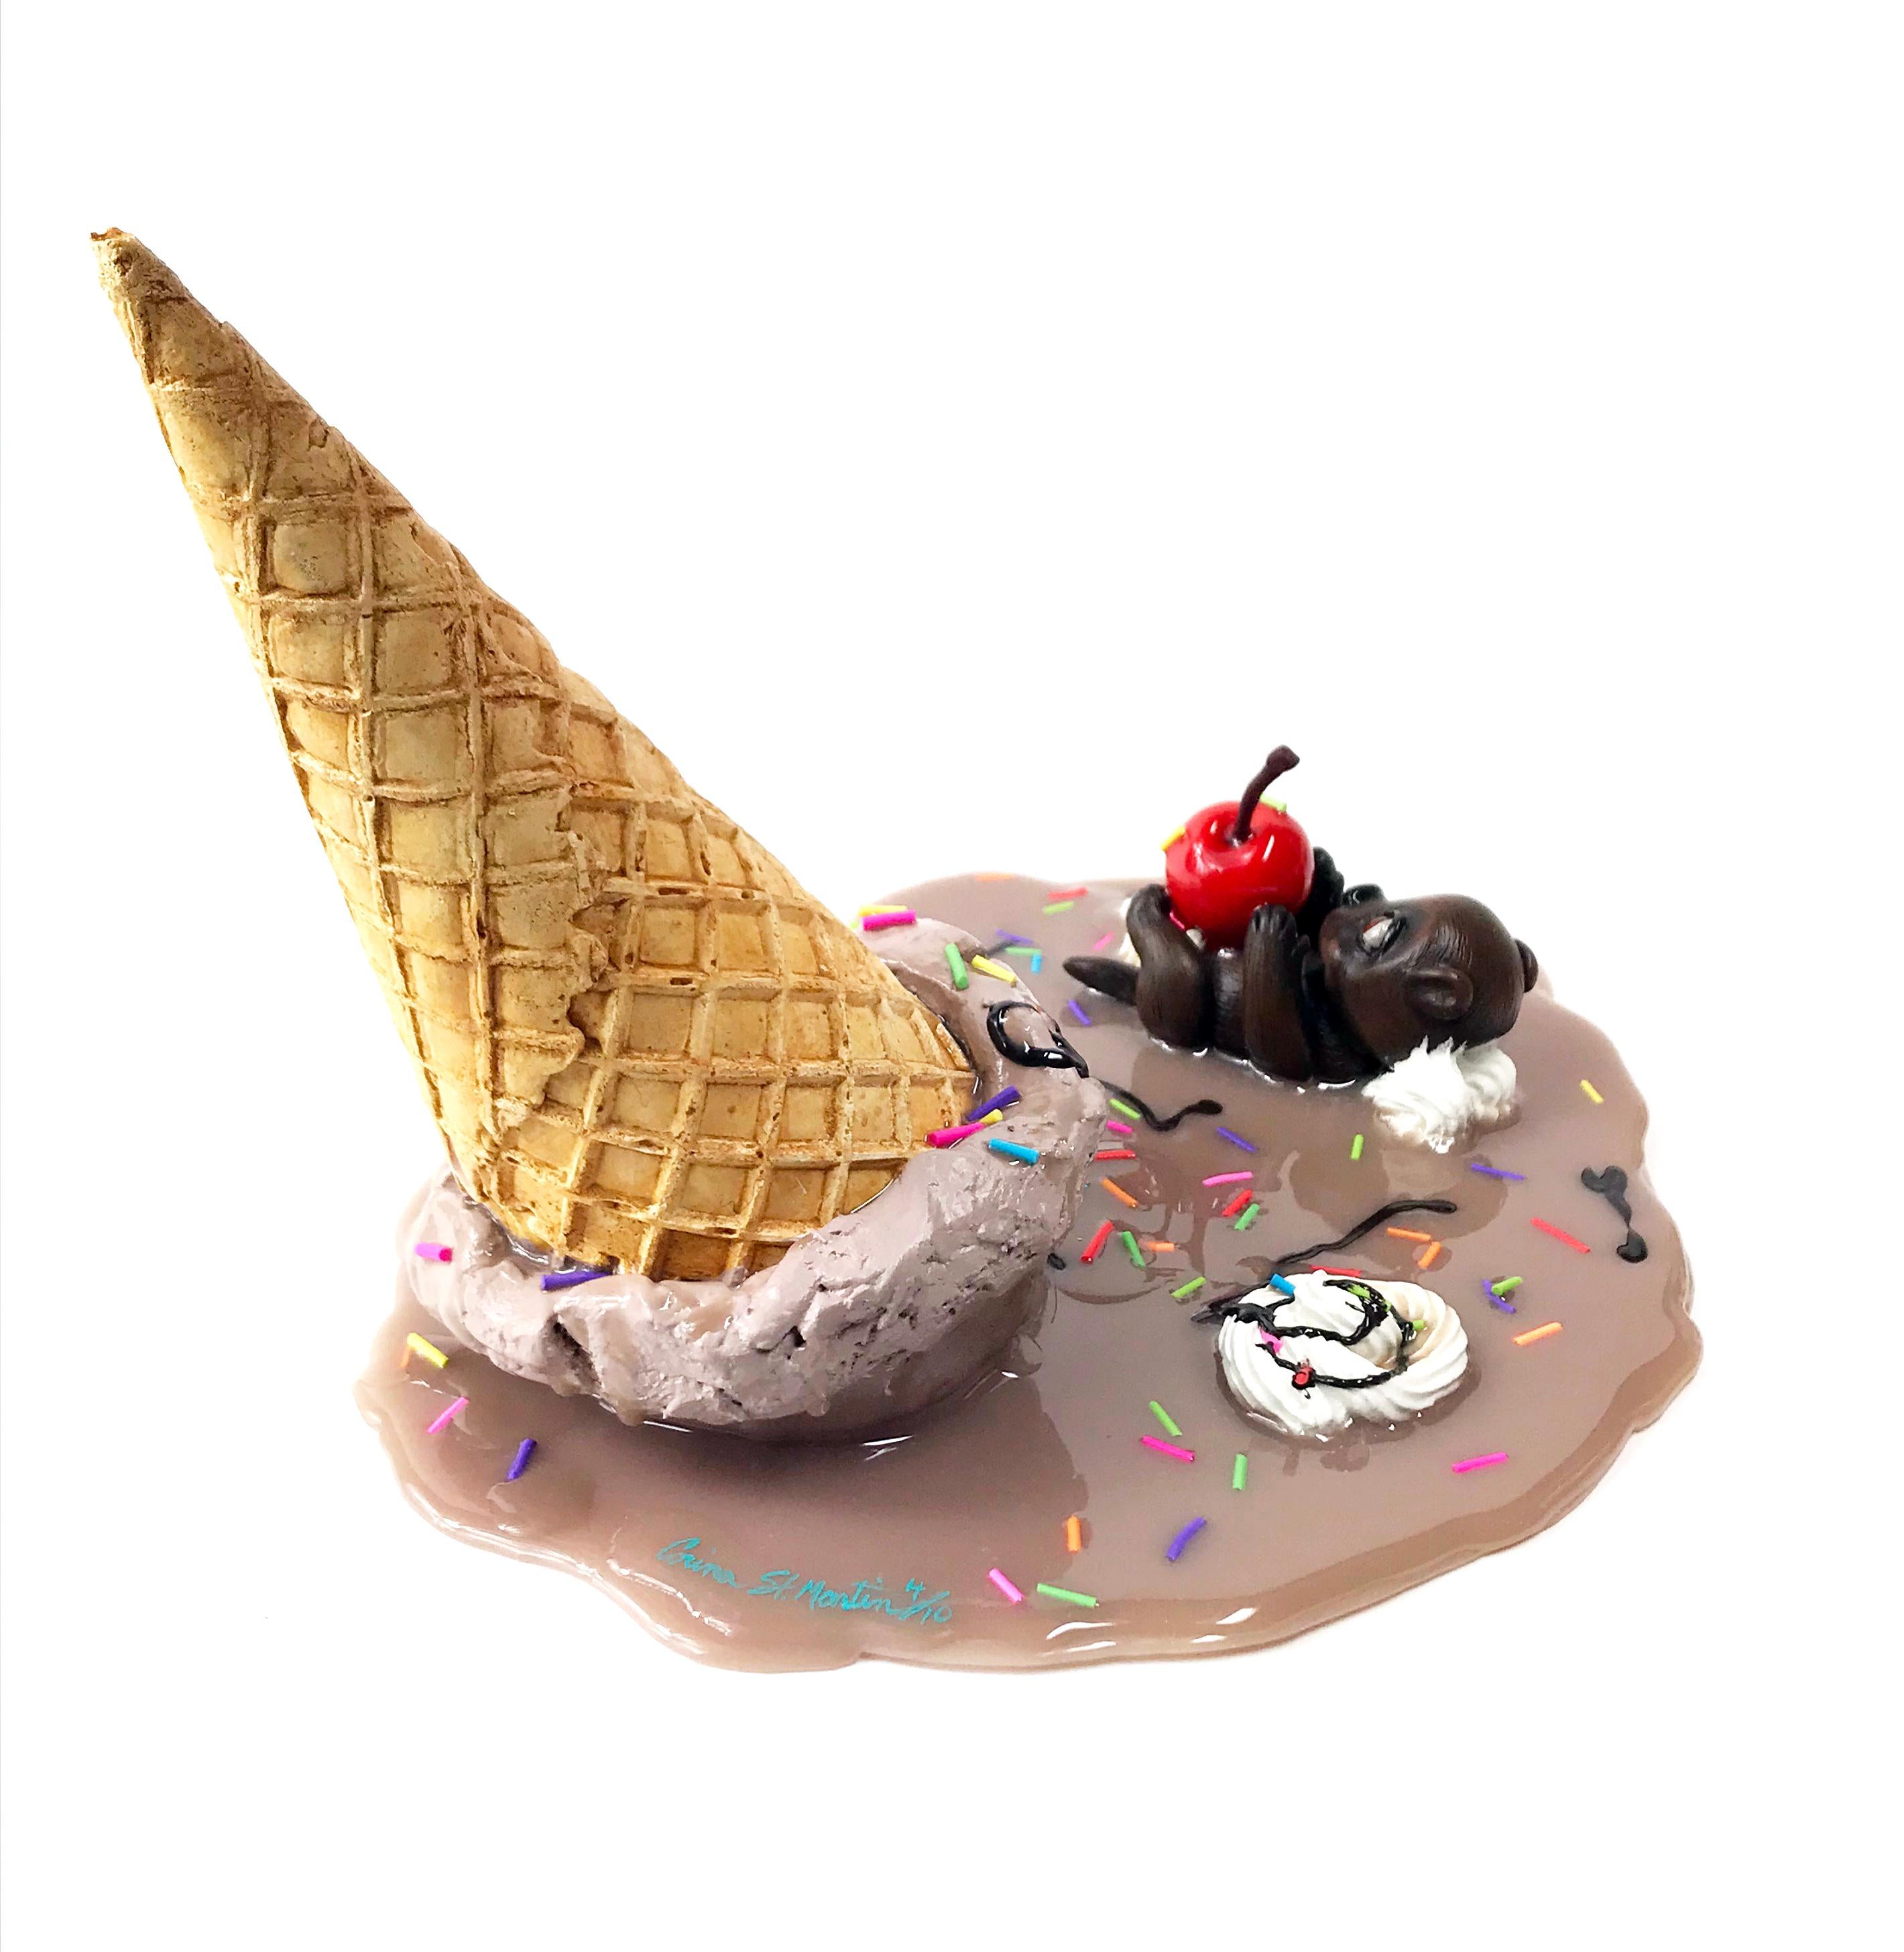 Otter and melting ice cream cone